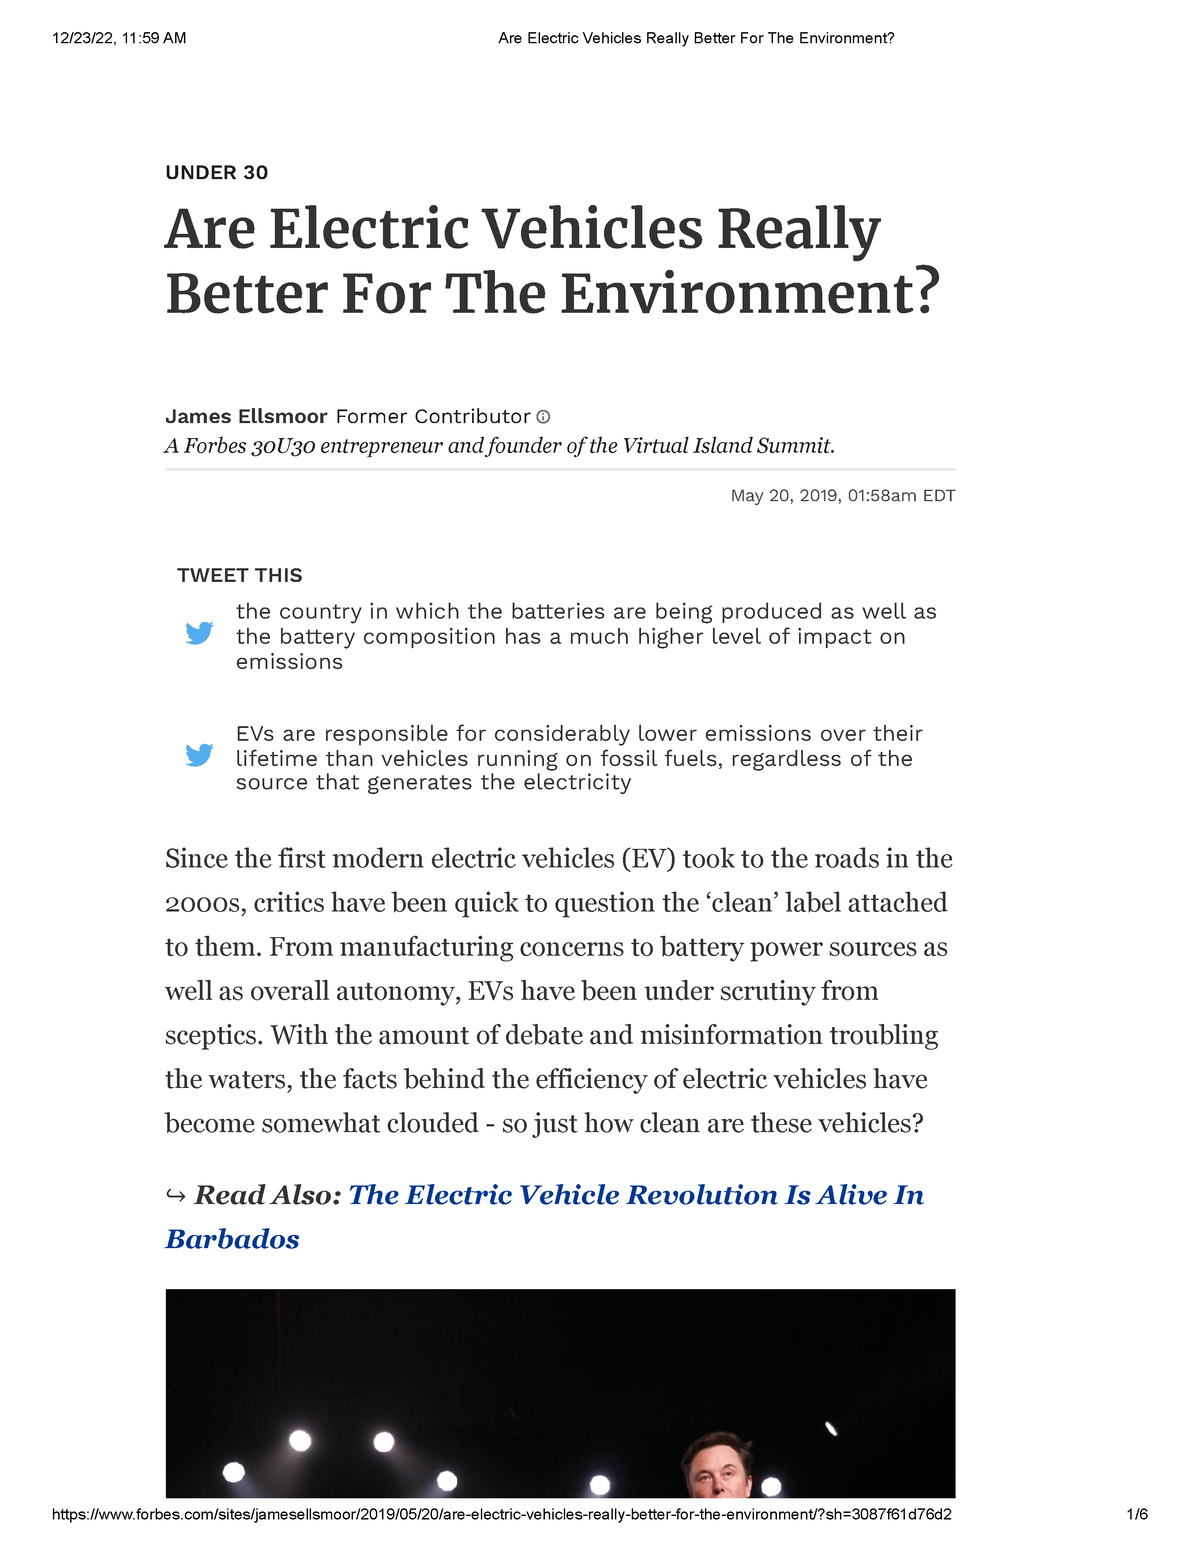 Are Electric Vehicles Really Better For The Environment A Forbes